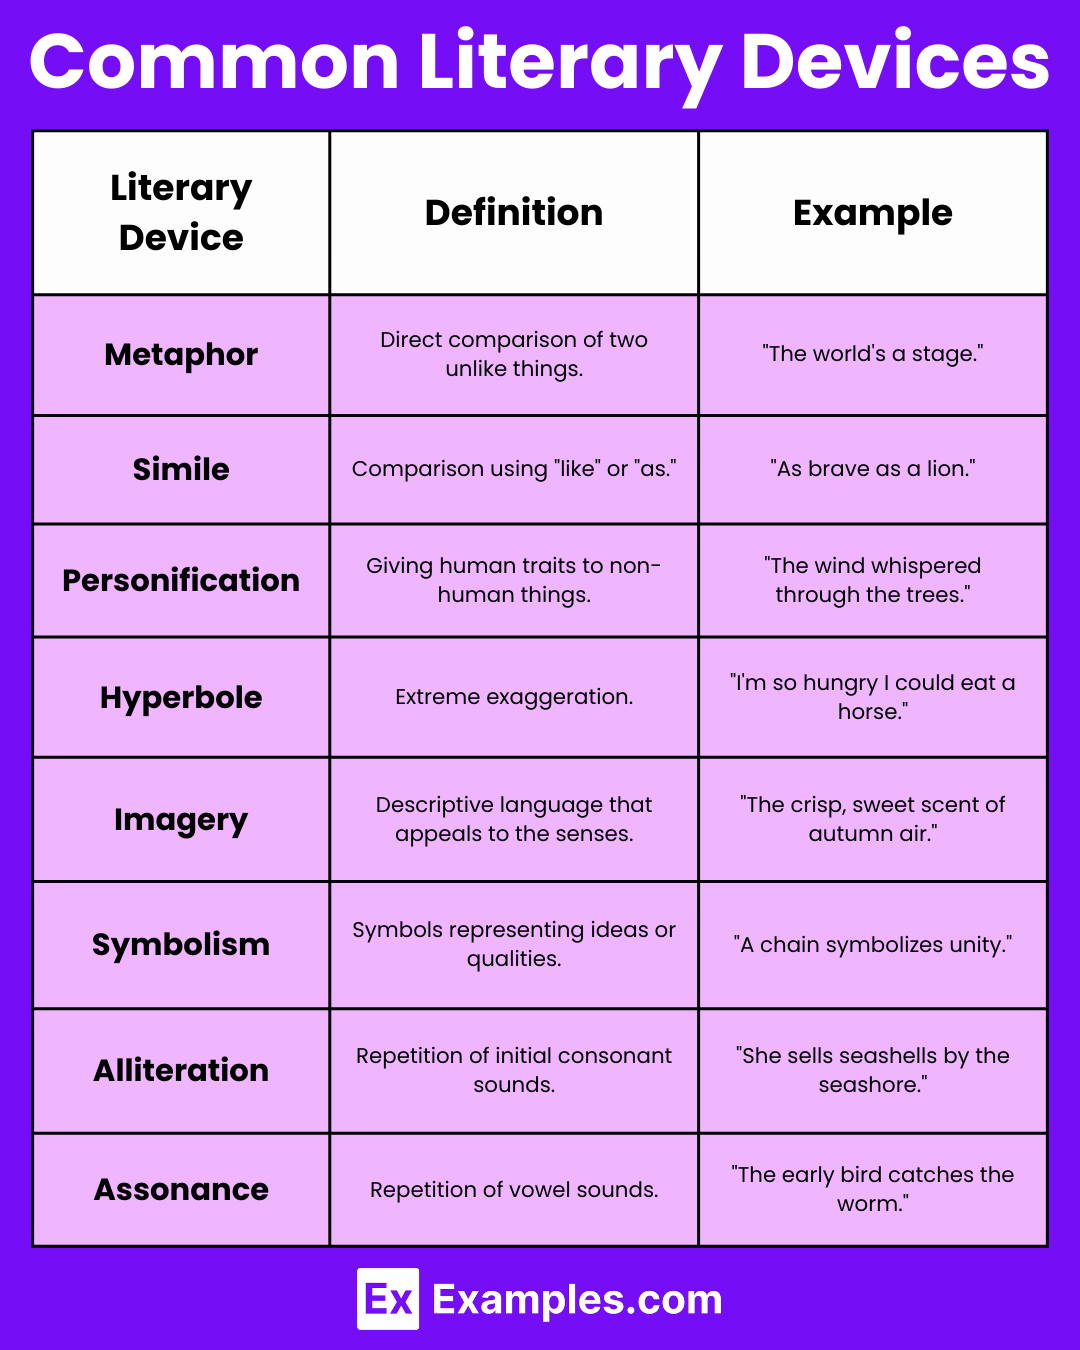 Common Literary Devices